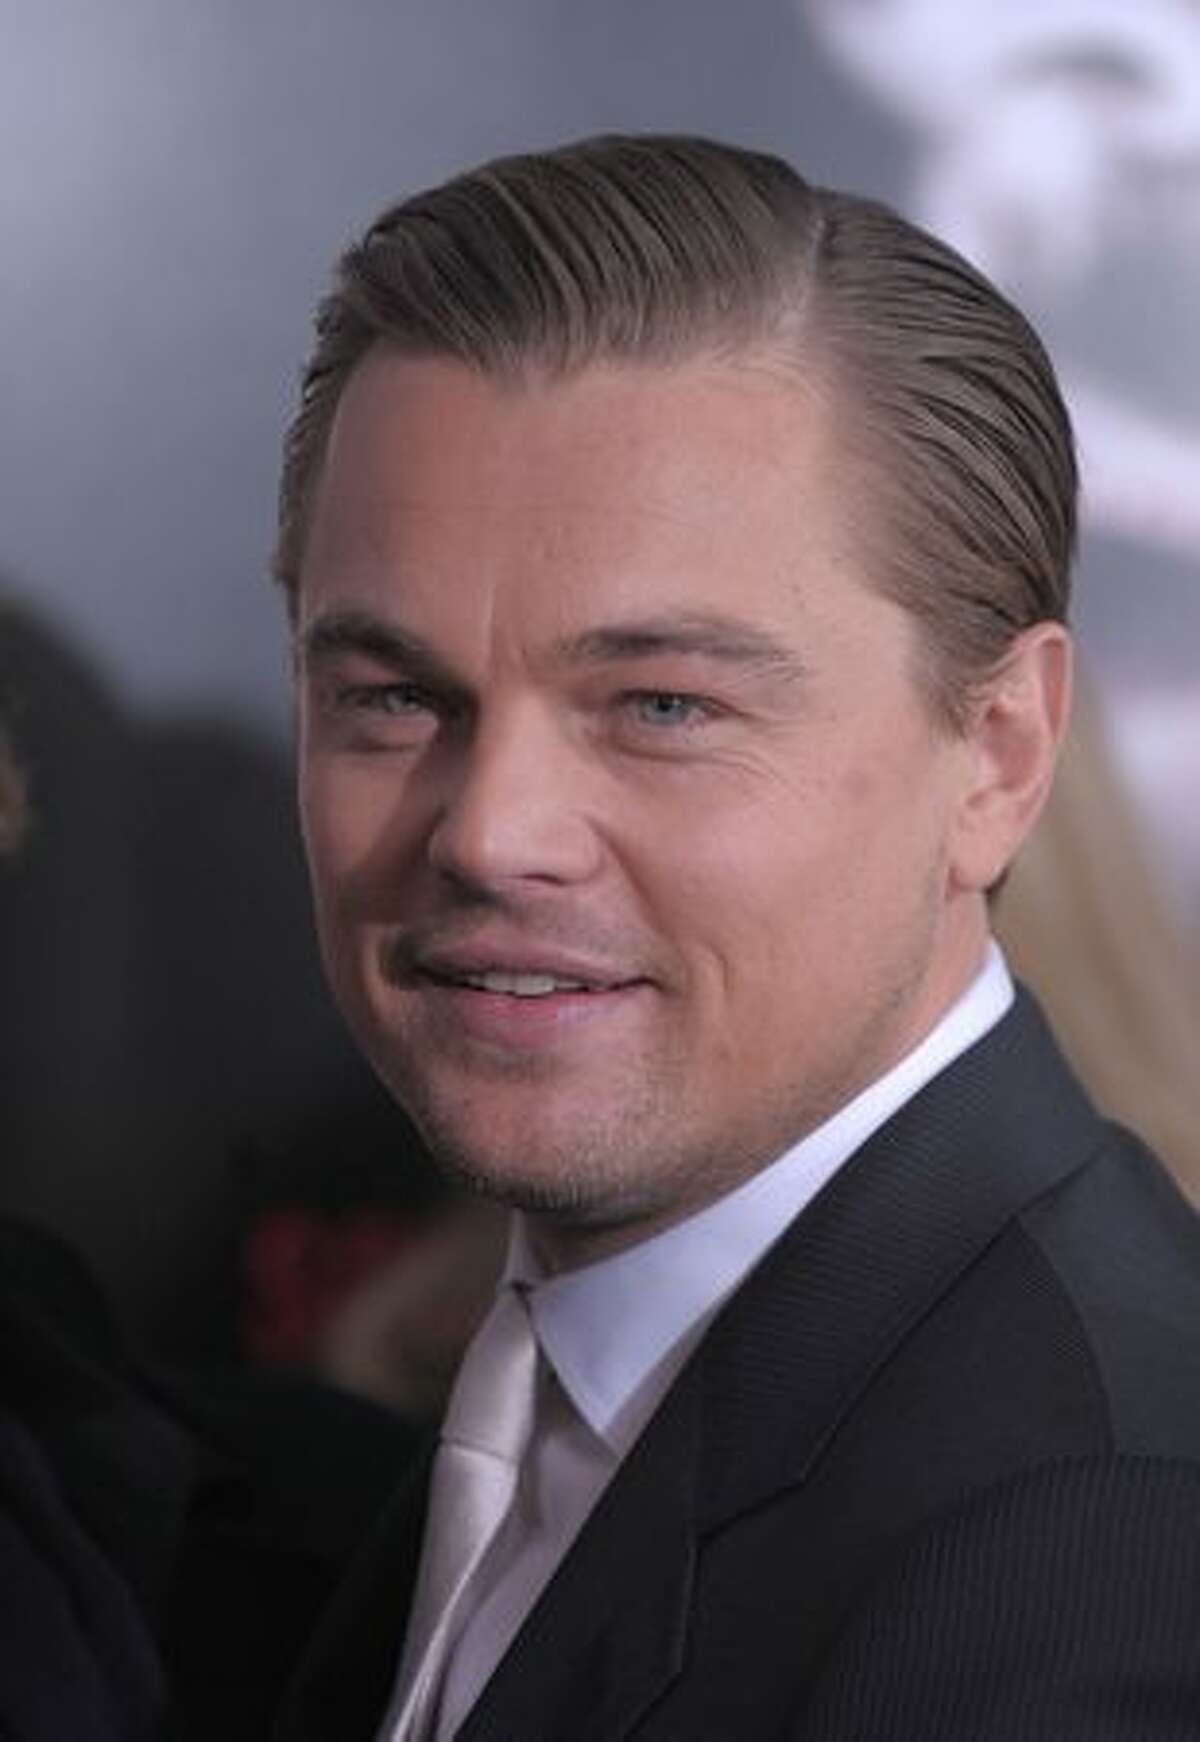 Actor Leonardo DiCaprio attends the "Shutter Island" special screening at the Ziegfeld Theatre on February 17, 2010 in New York City.